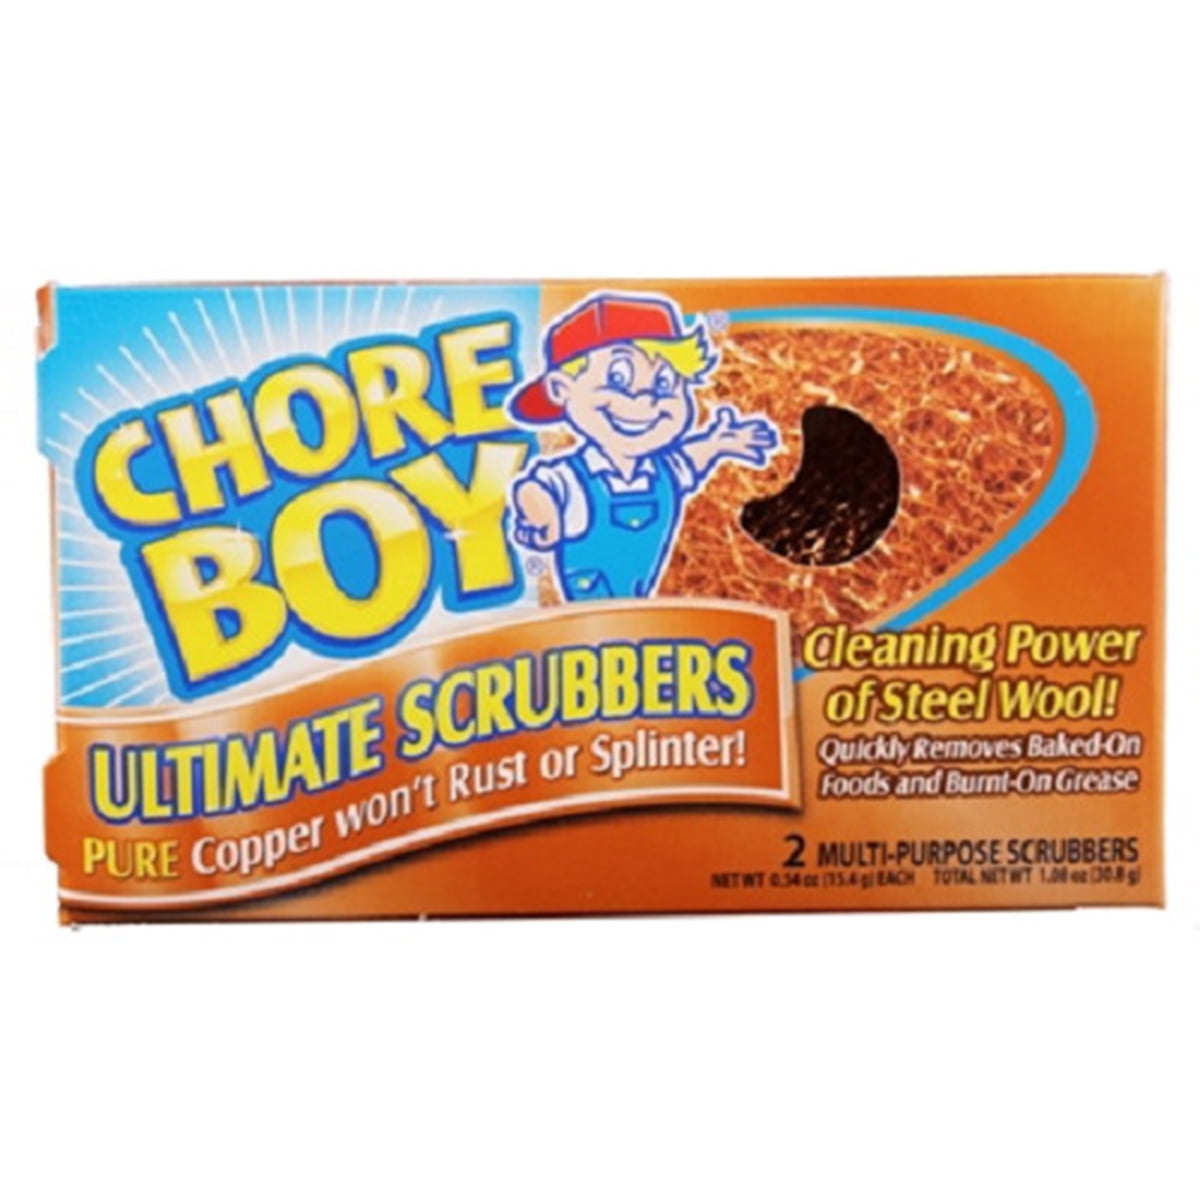 CHORE BOY Golden Fleece Scouring Cloths Pad Cleaning Kitchen Lawn Tools 24 Pads 